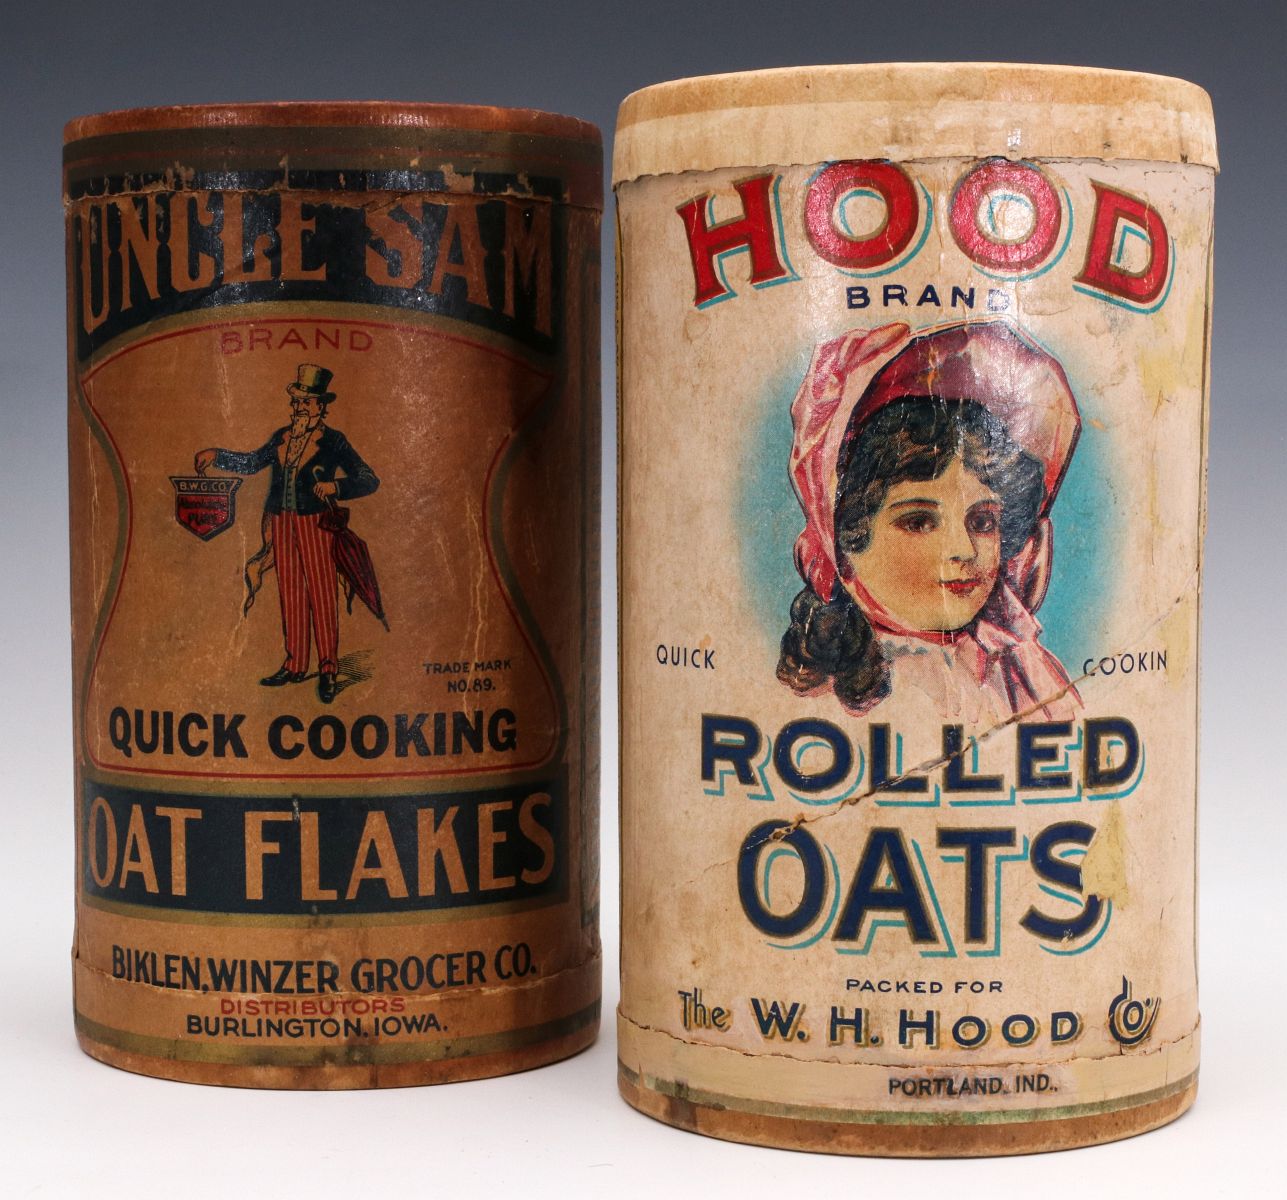 UNCLE SAM AND HOOD BRAND QUICK OATS CONTAINERS